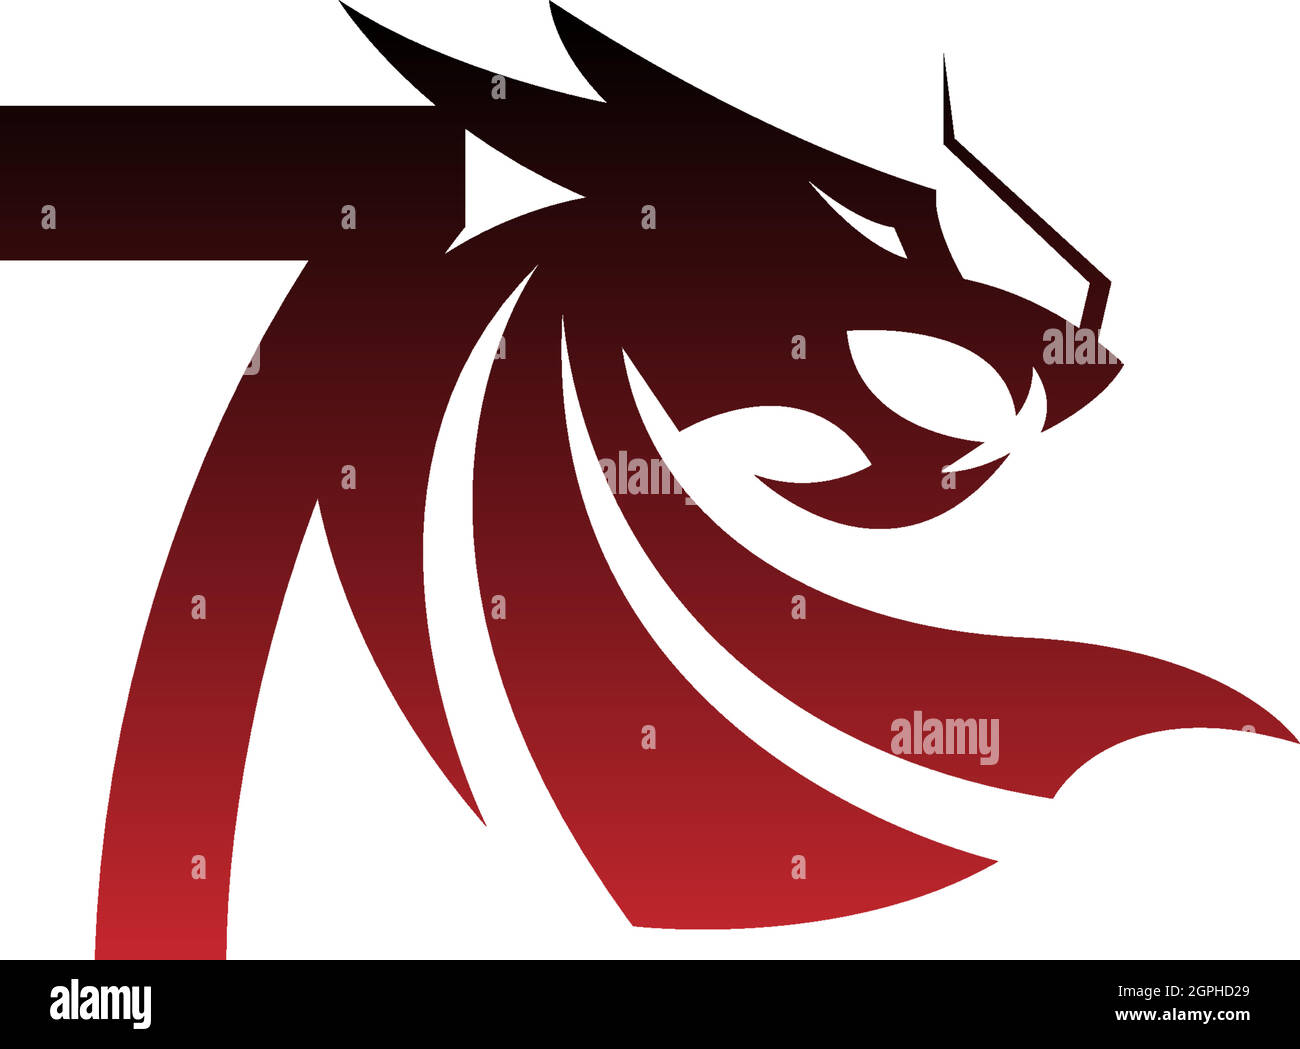 Number 7 logo icon with dragon design vector Stock Vector